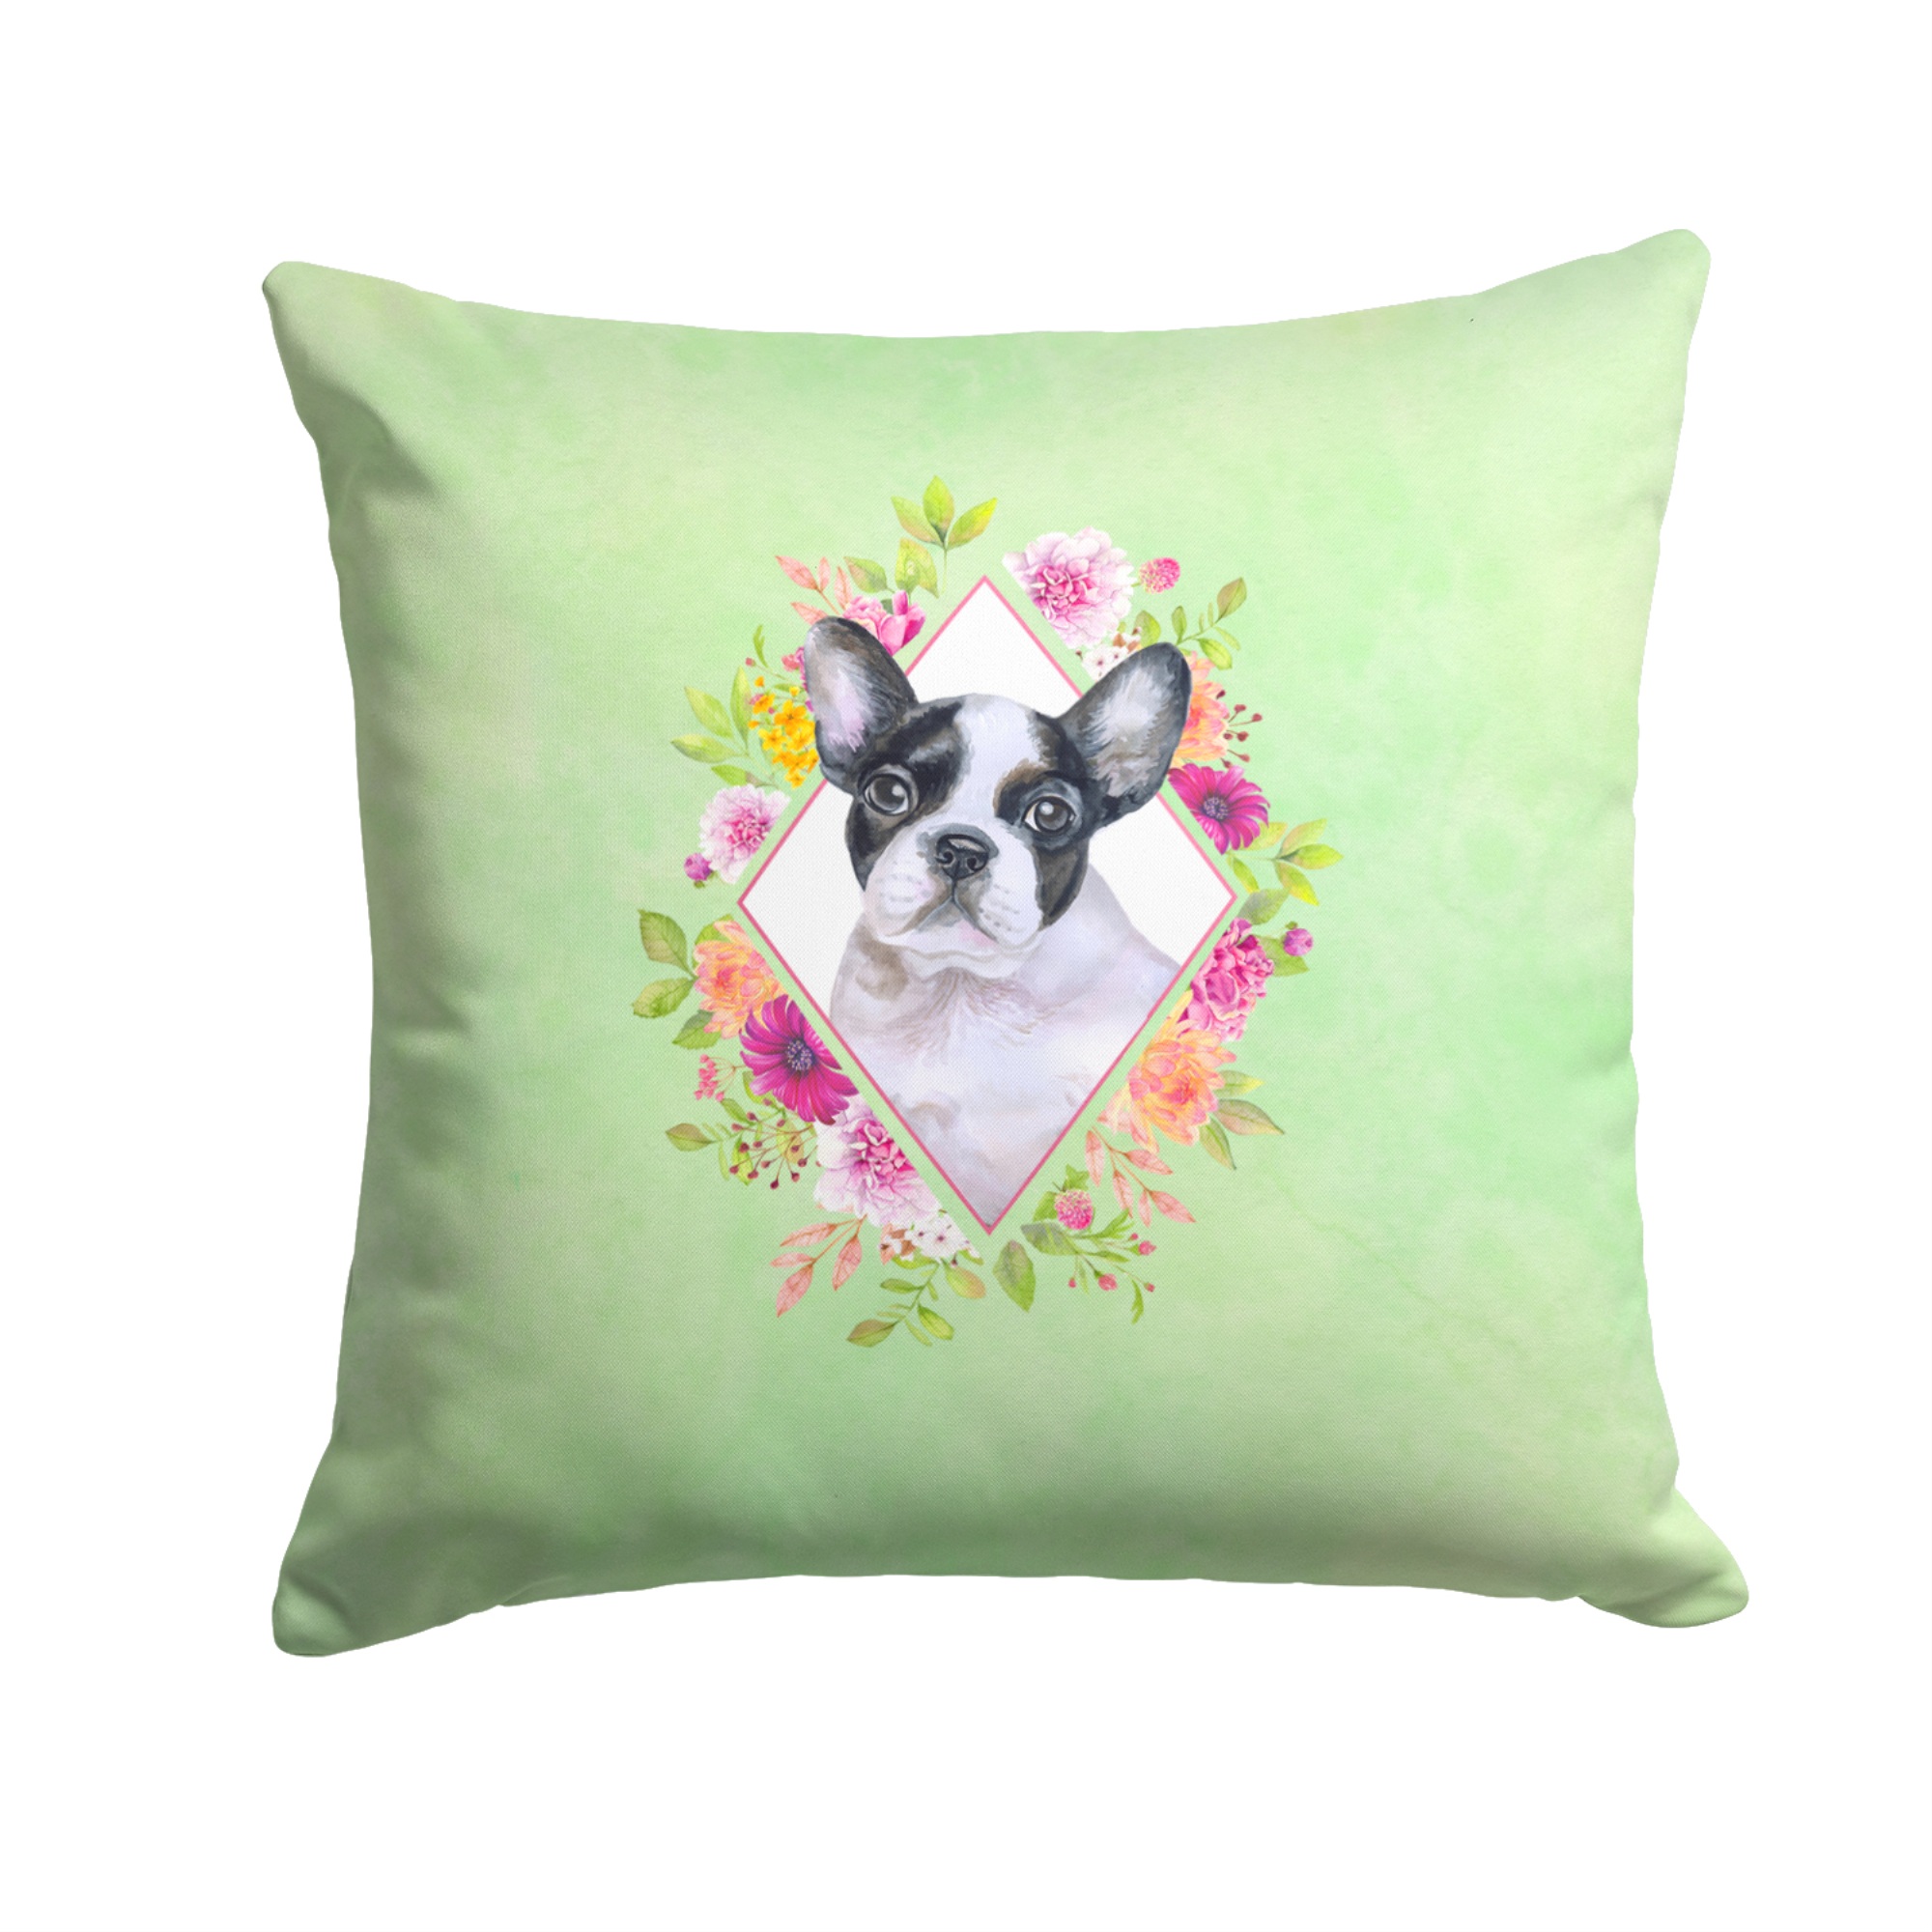 Caroline's Treasures "Caroline's Treasures CK4303PW1414 French Bulldog Green Flowers Fabric Decorative Pillow Patio-Furniture-Pillows, Multicolor"